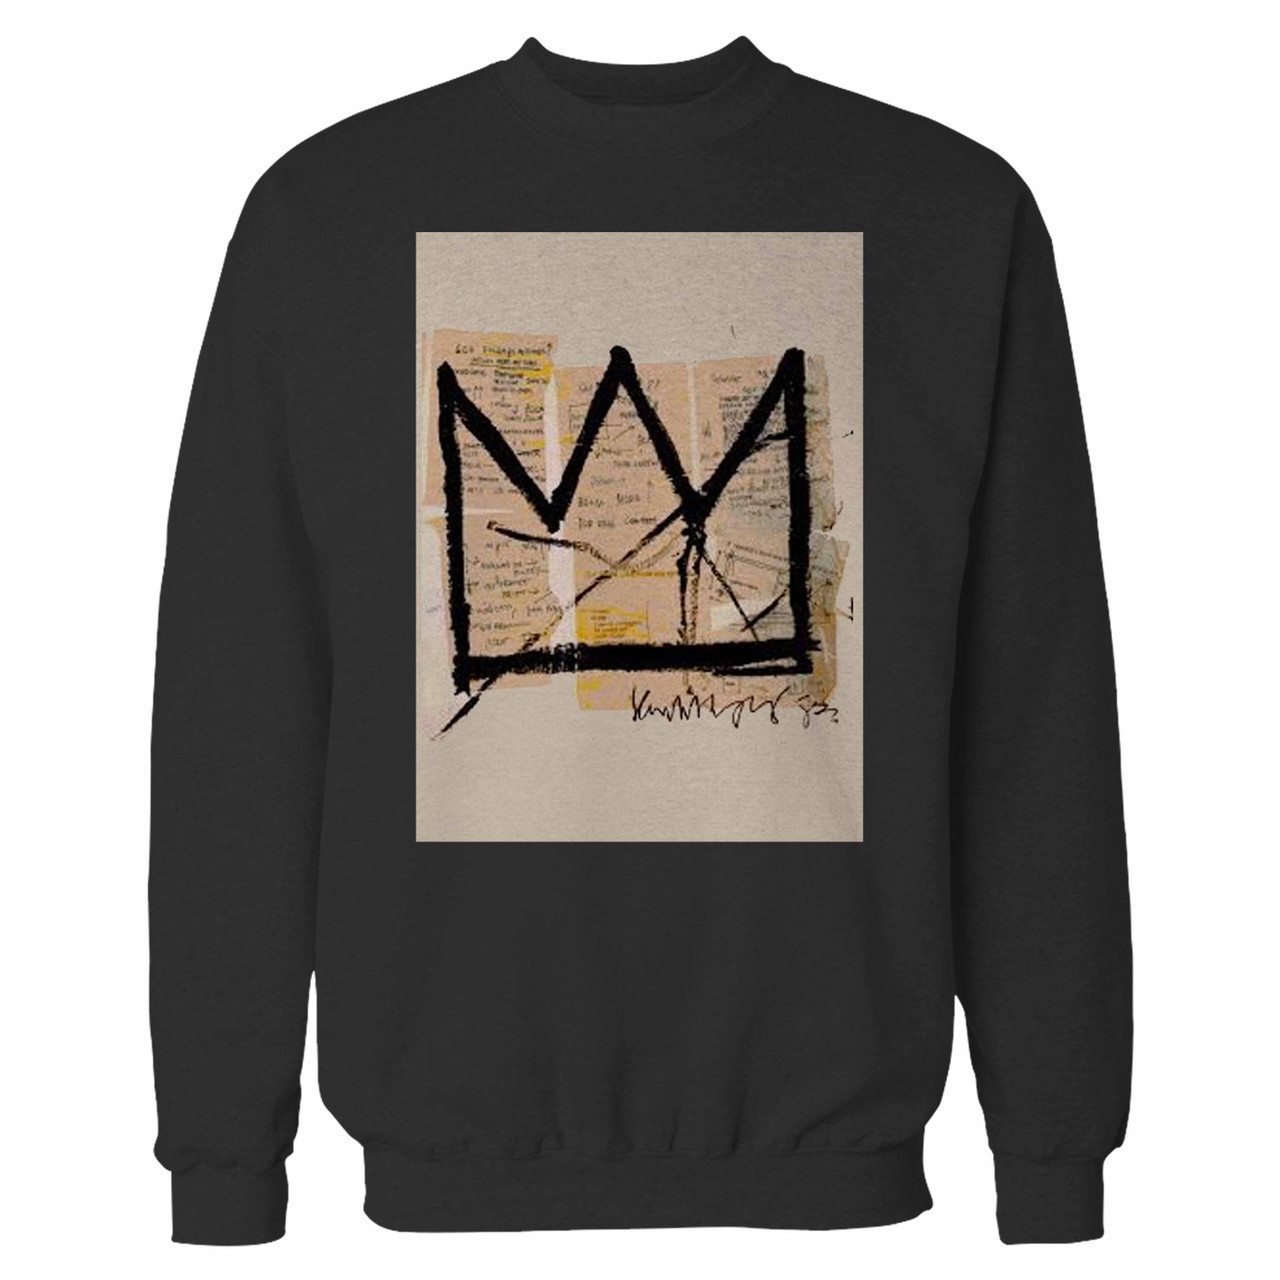 Funny Jean Michel Basquiat T-shirt,Sweater, Hoodie, And Long Sleeved,  Ladies, Tank Top